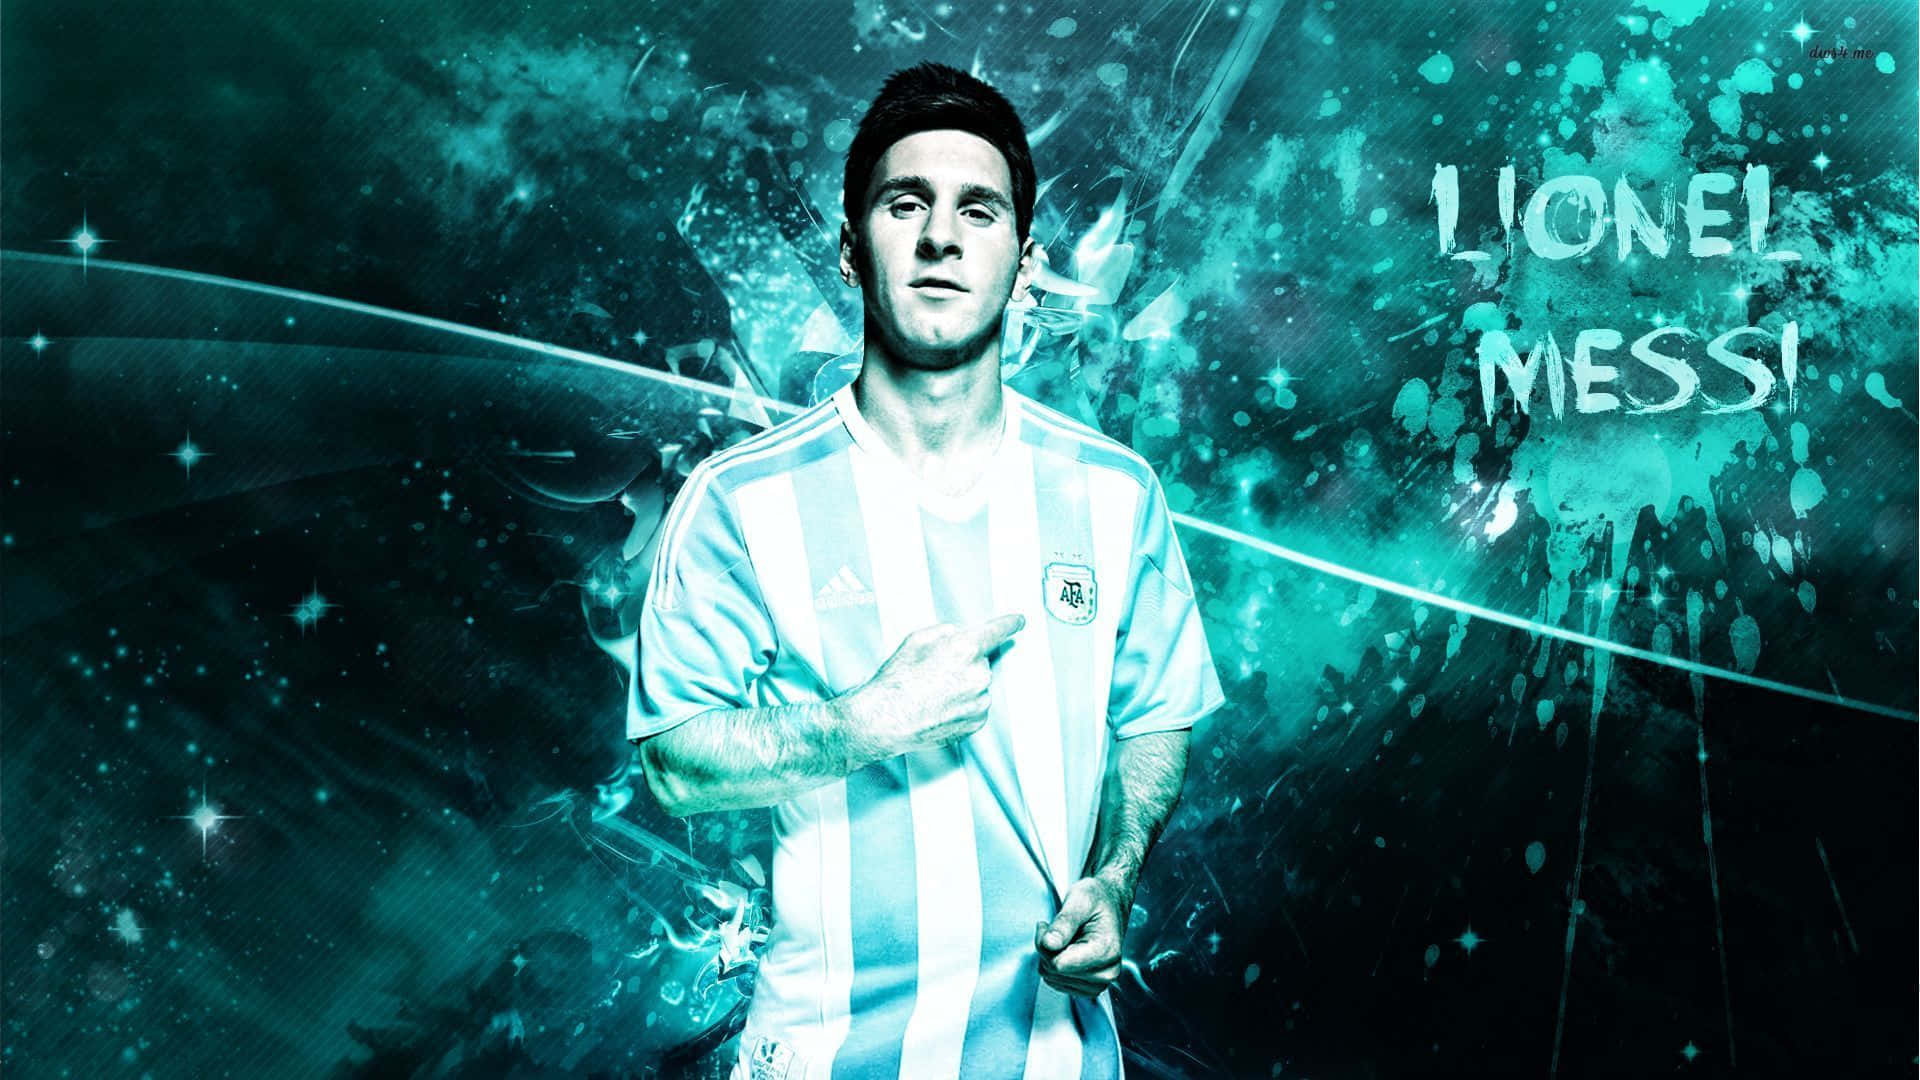 Lionel Messi Looking Cool Wallpaper